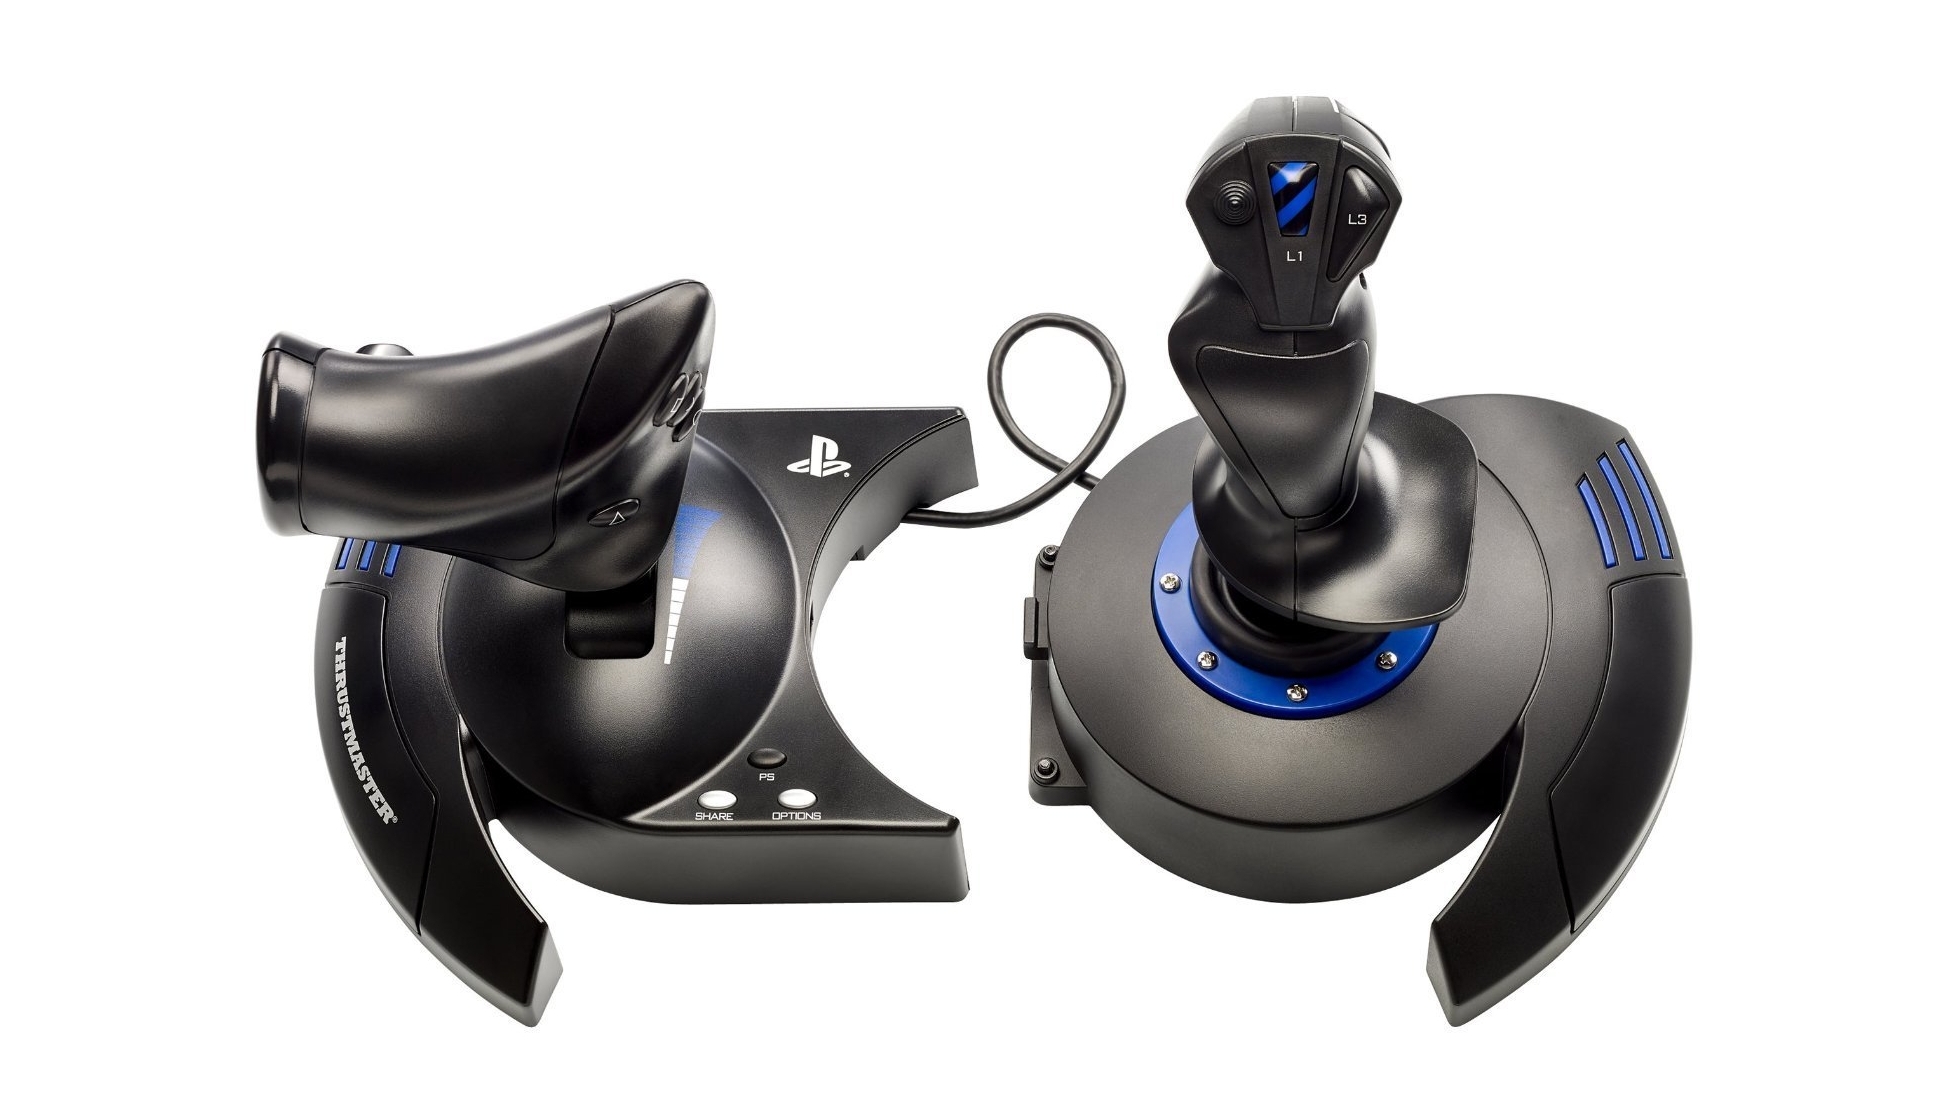 thrustmaster ps4 controller price